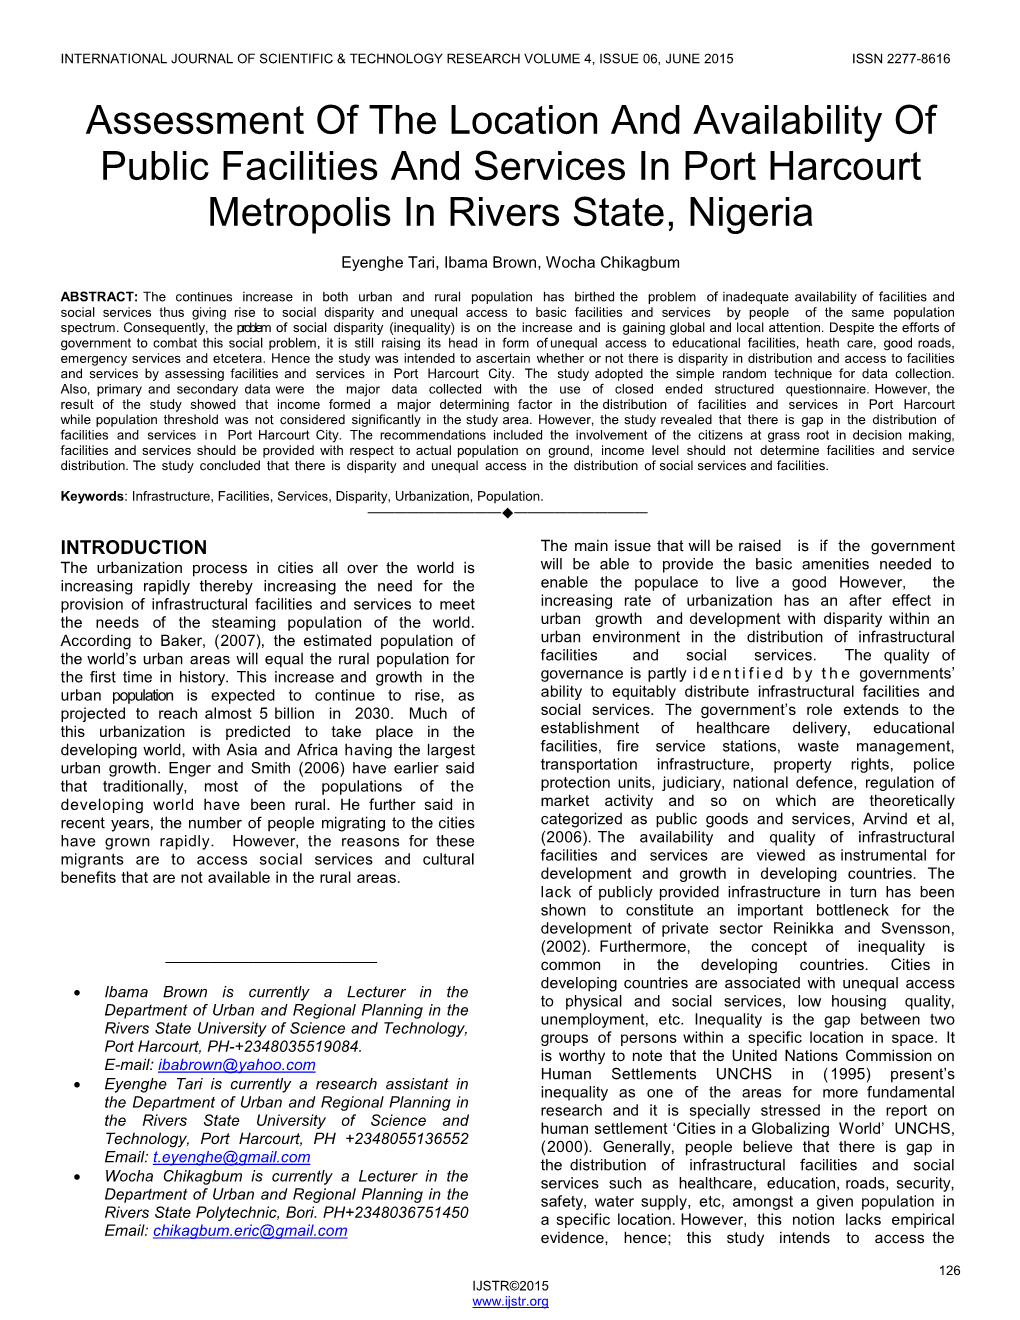 Assessment of the Location and Availability of Public Facilities and Services in Port Harcourt Metropolis in Rivers State, Nigeria